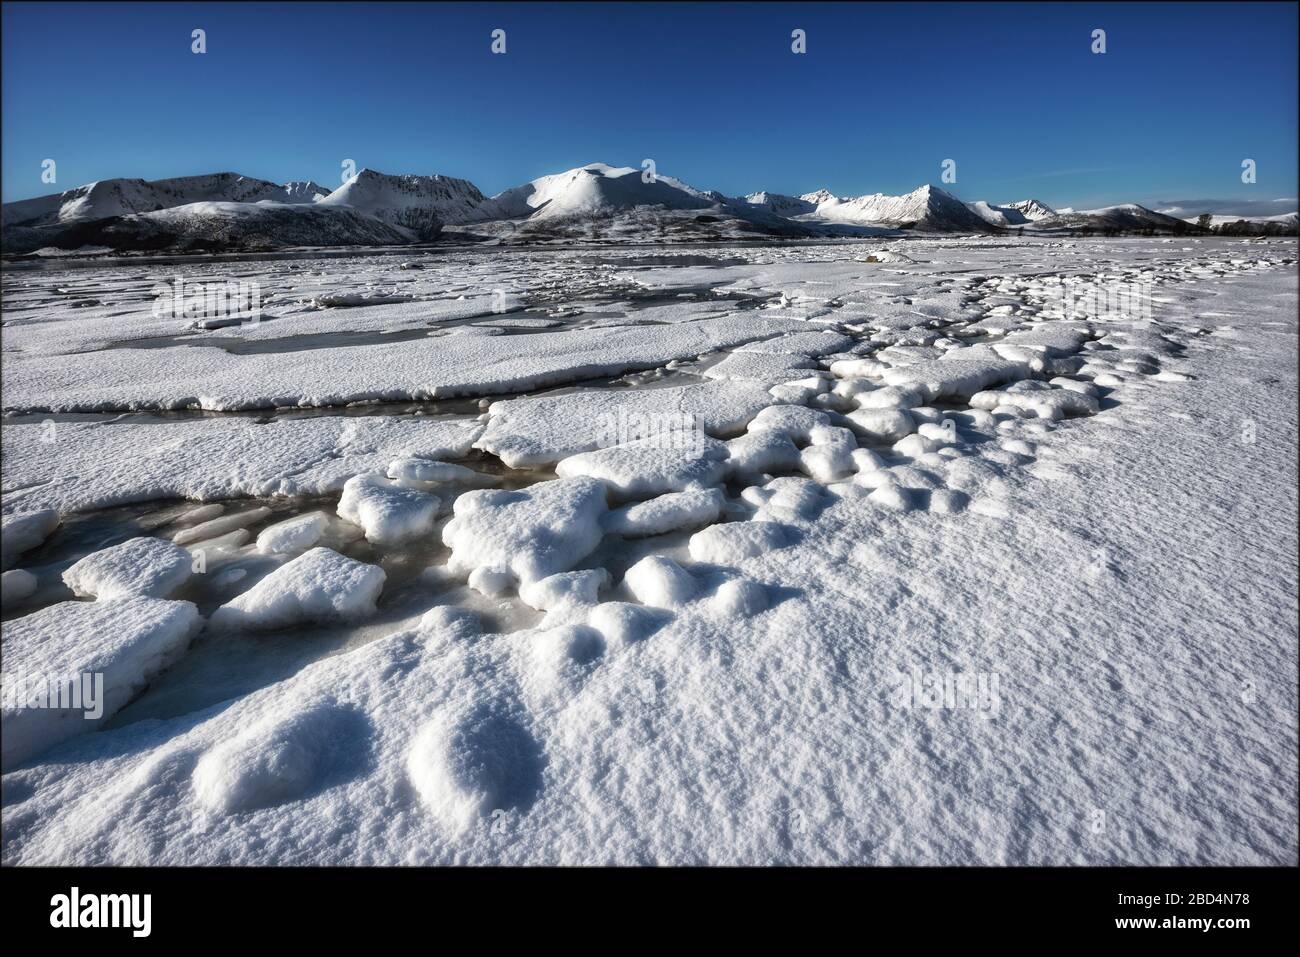 Land - water transition under snow and ice. Norway Stock Photo